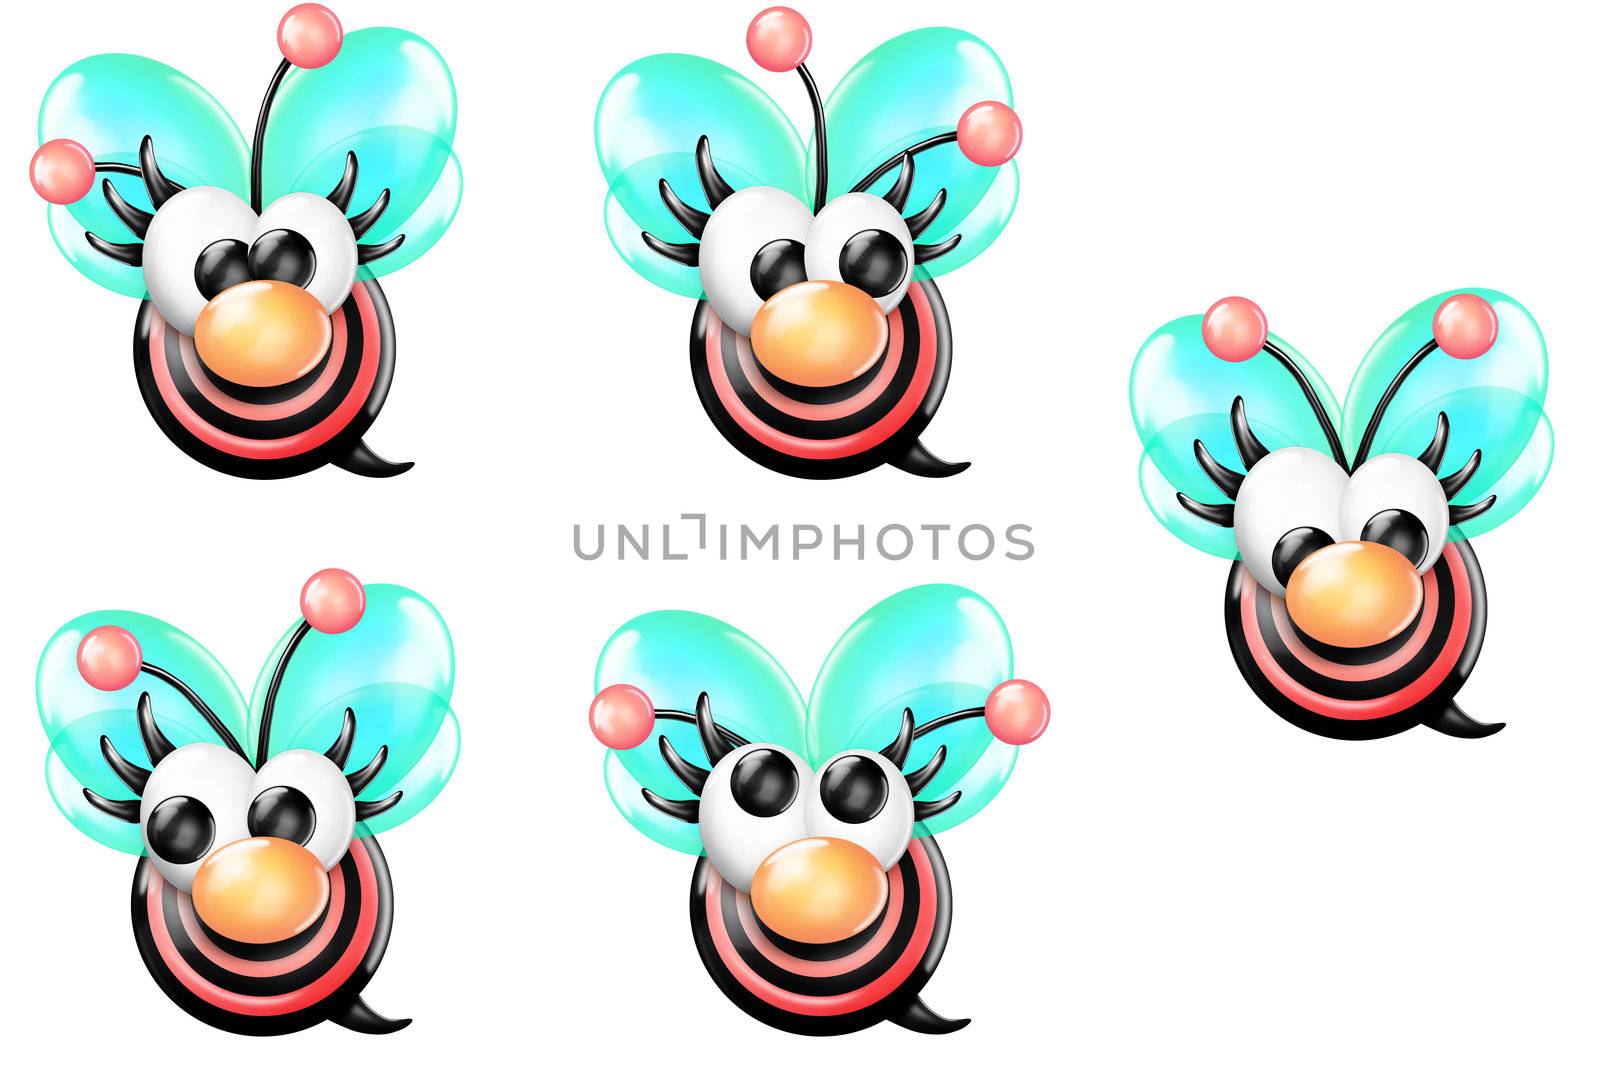 A front view of a cartoon bee.